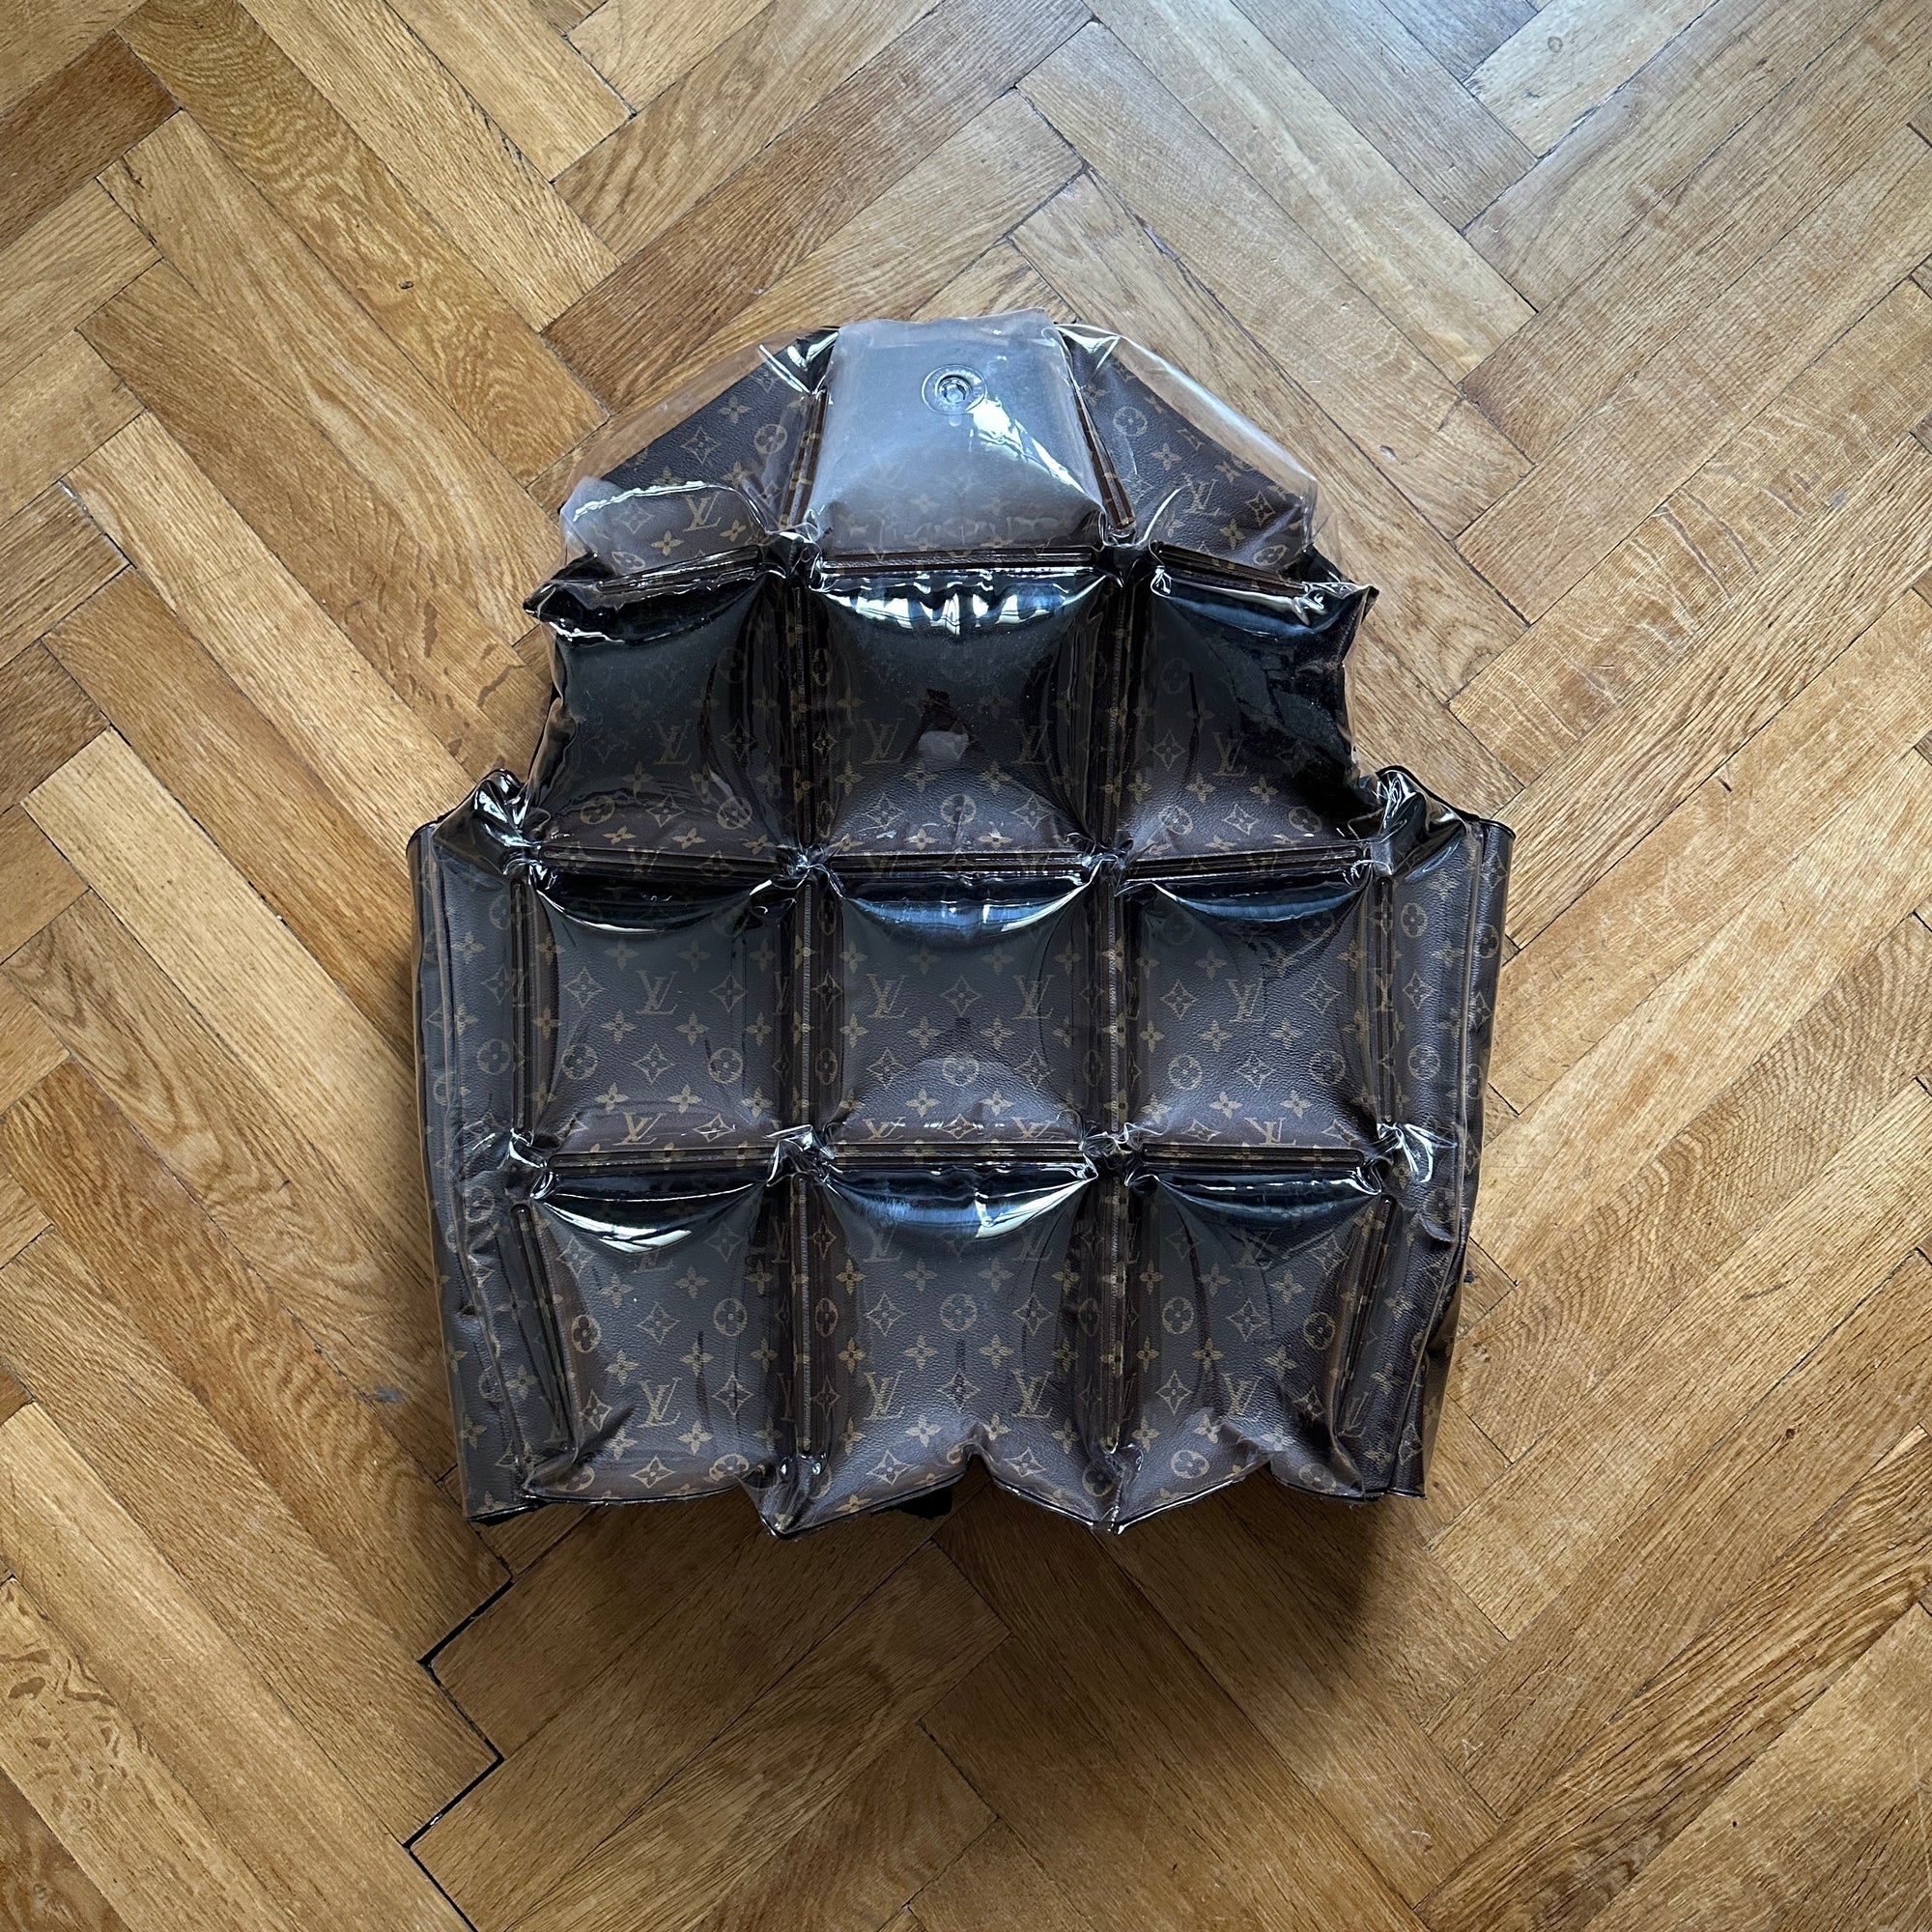 lv inflatable jacket